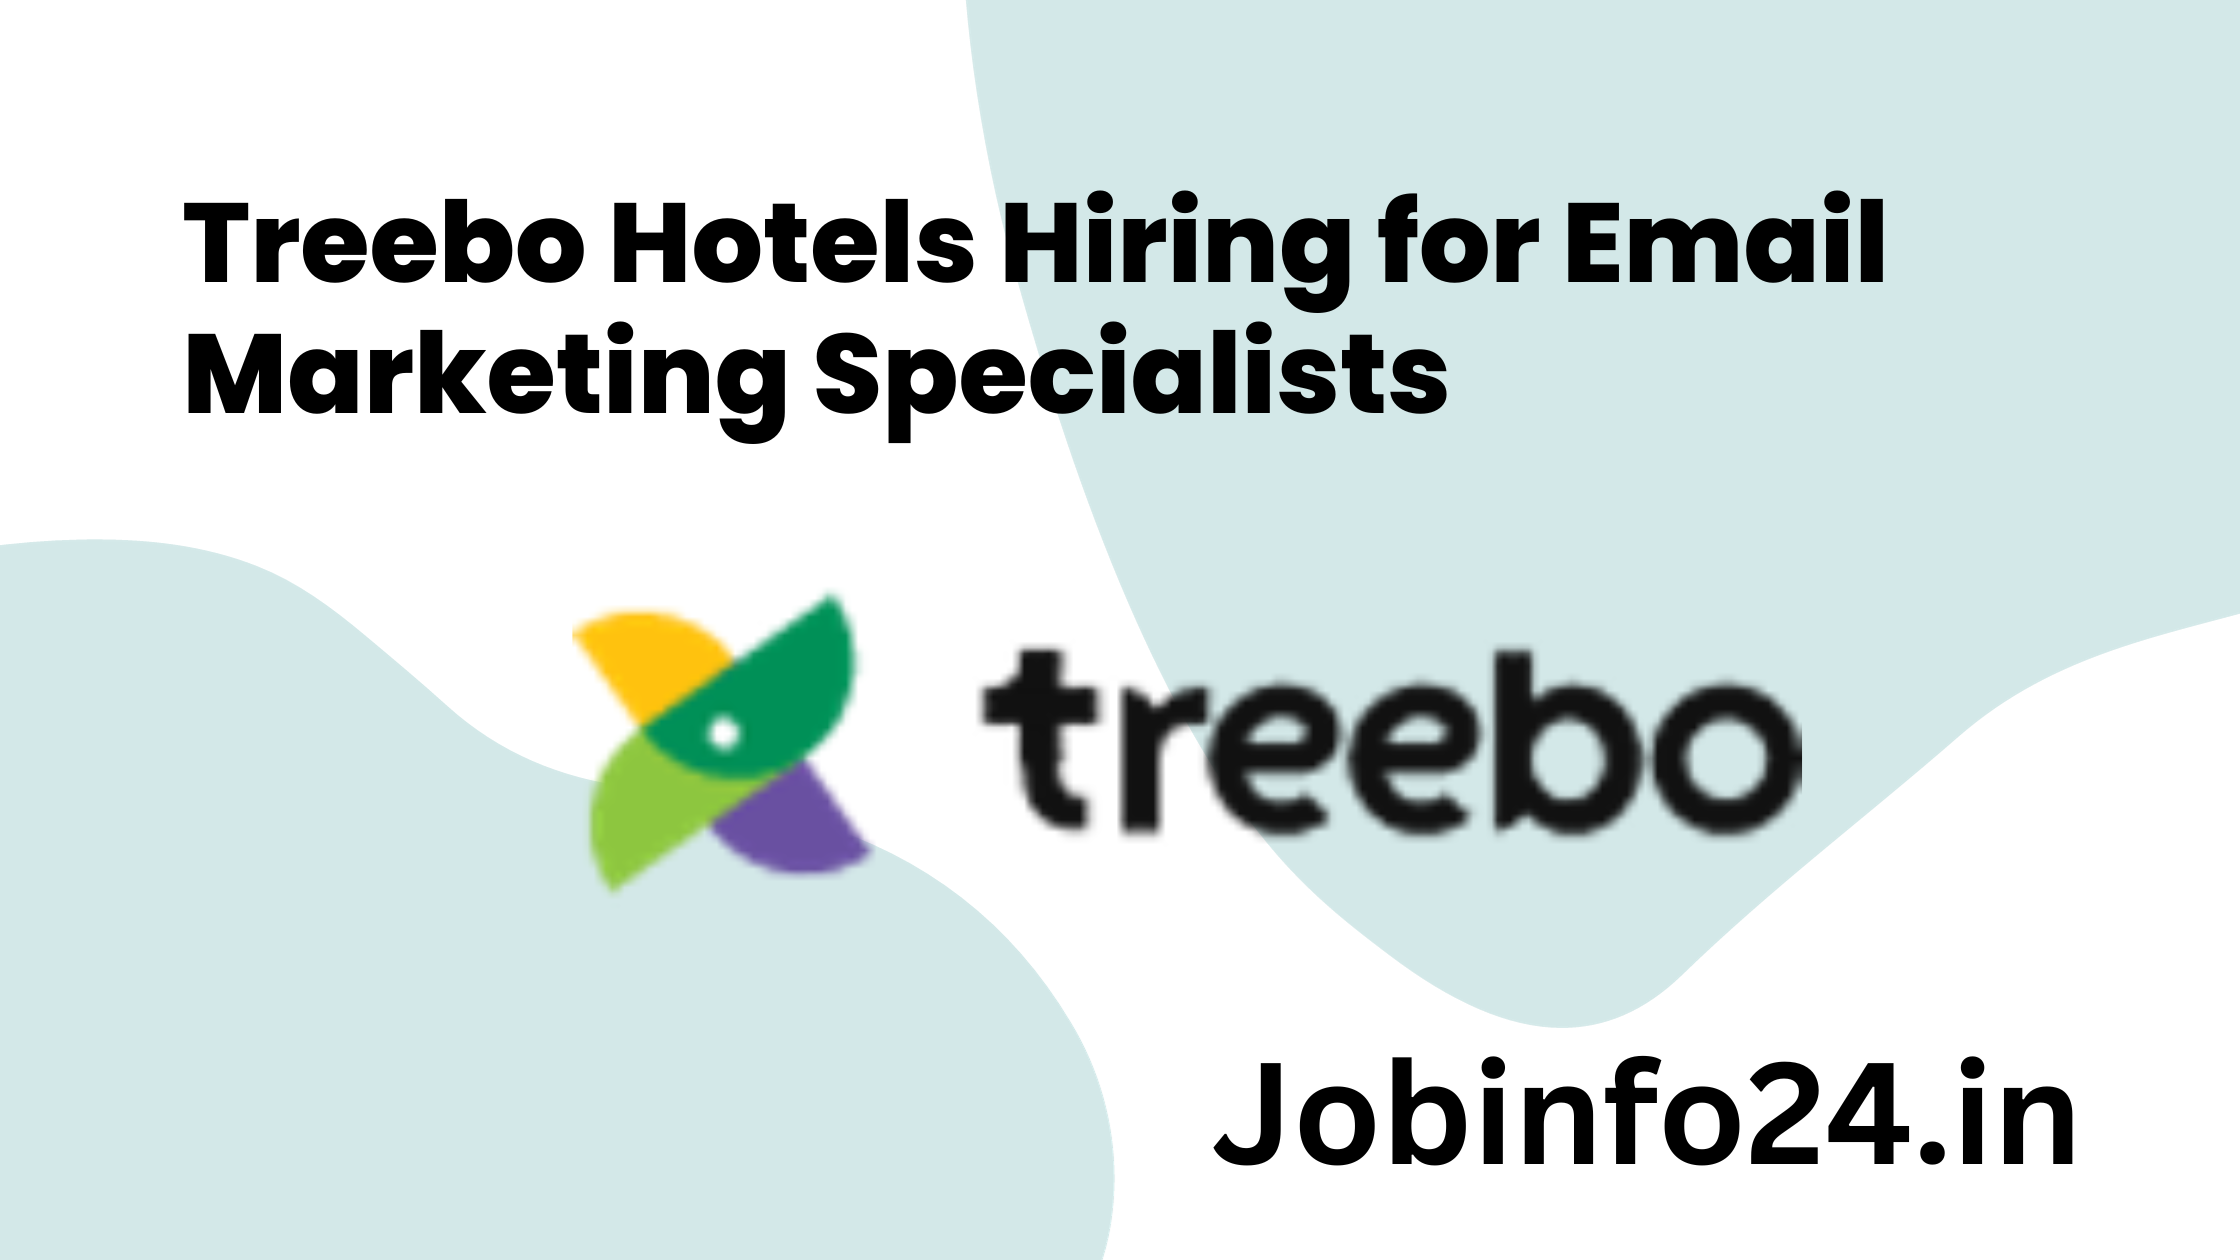 Treebo Hotels Hiring for Email Marketing Specialists